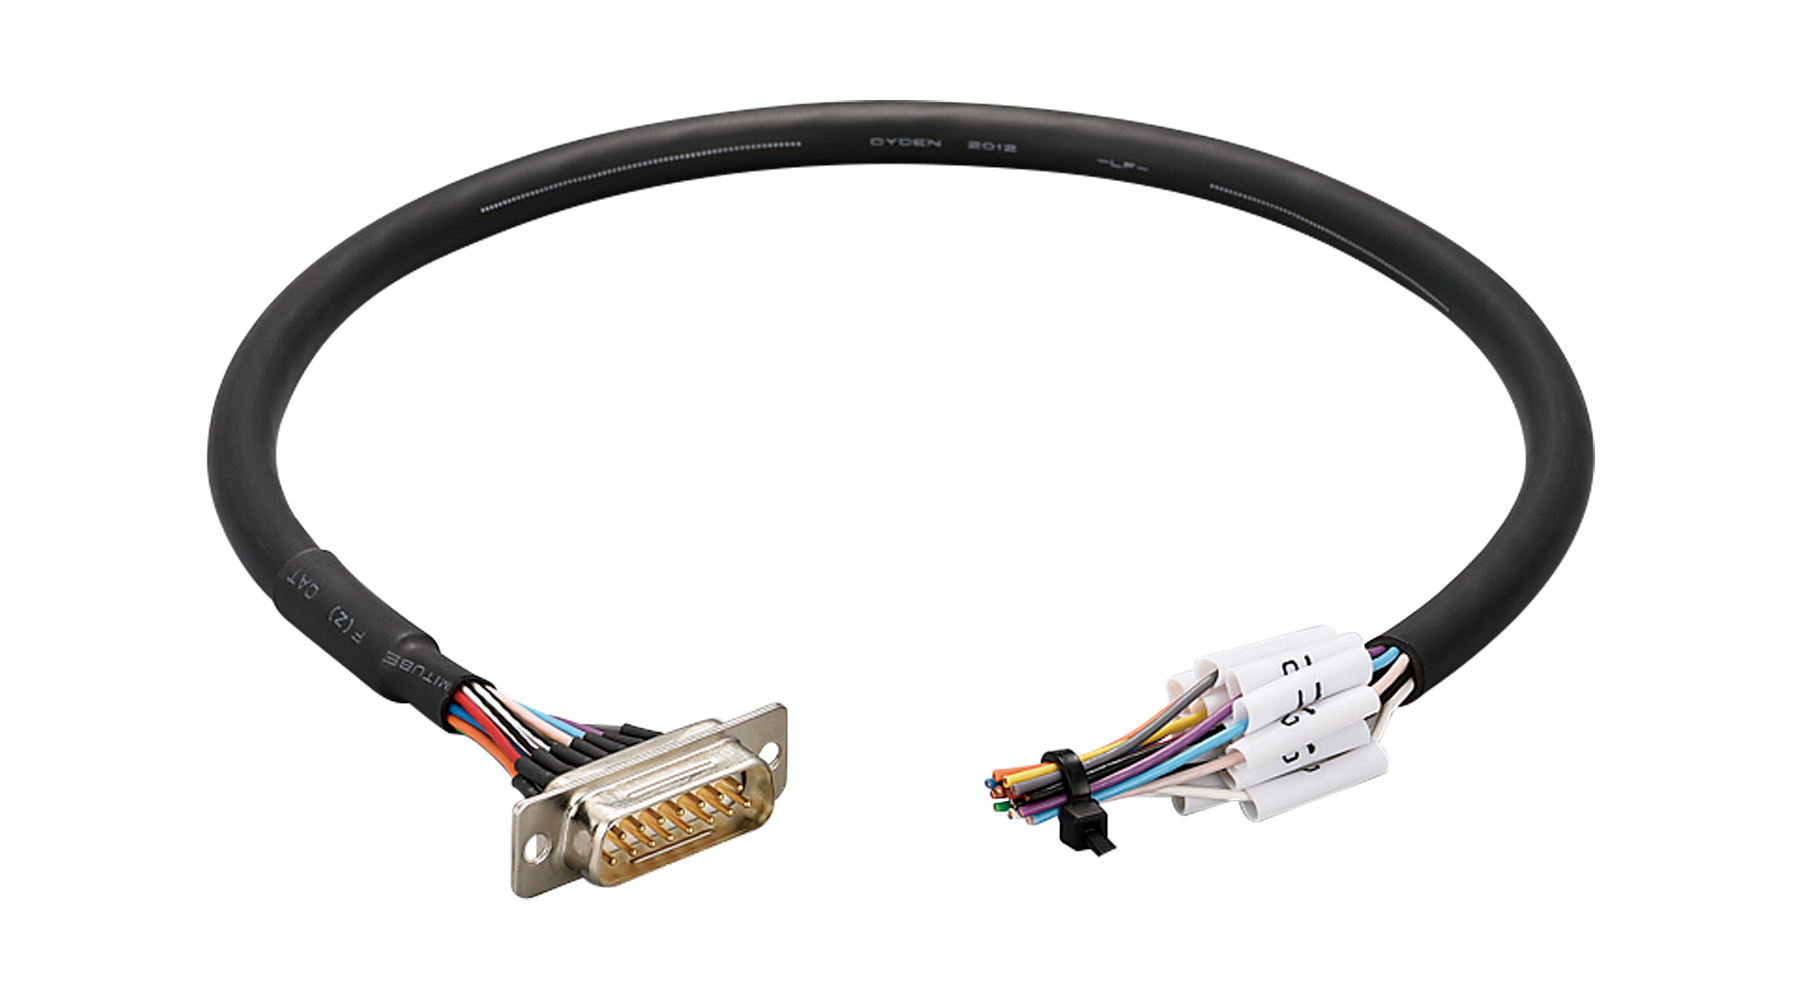 D-SUB Cable for OX